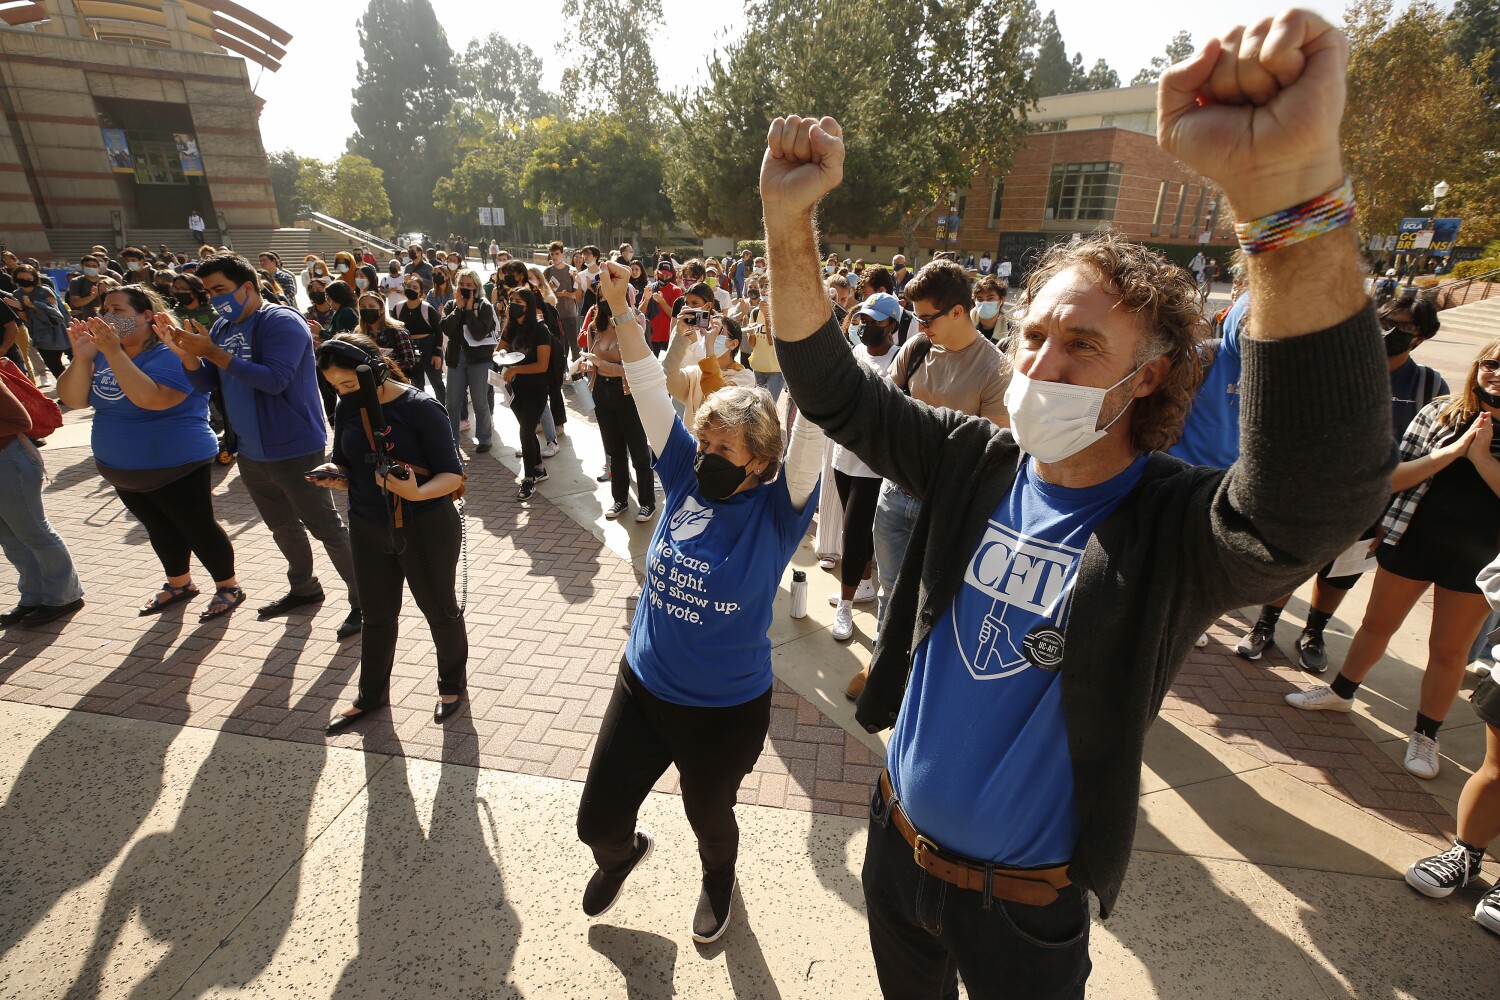 Critical role of UC lecturers affirmed as strike is averted, tentative agreement reached